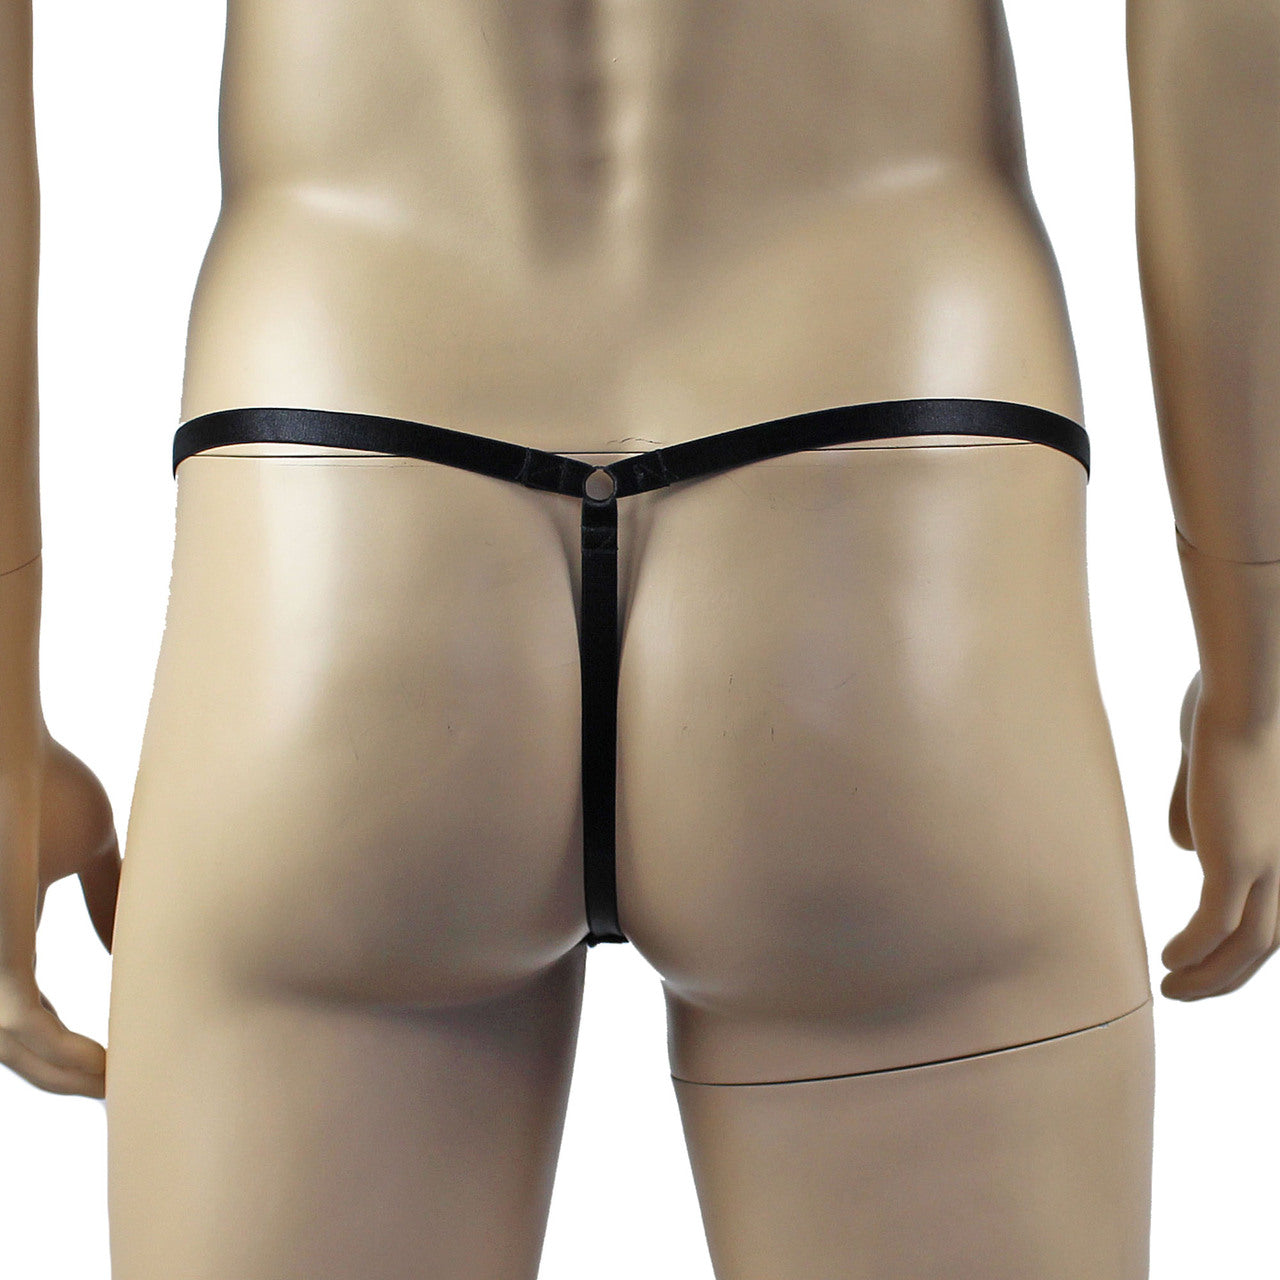 Male Oil Wetlook Pouch G string (grey plus other colours)